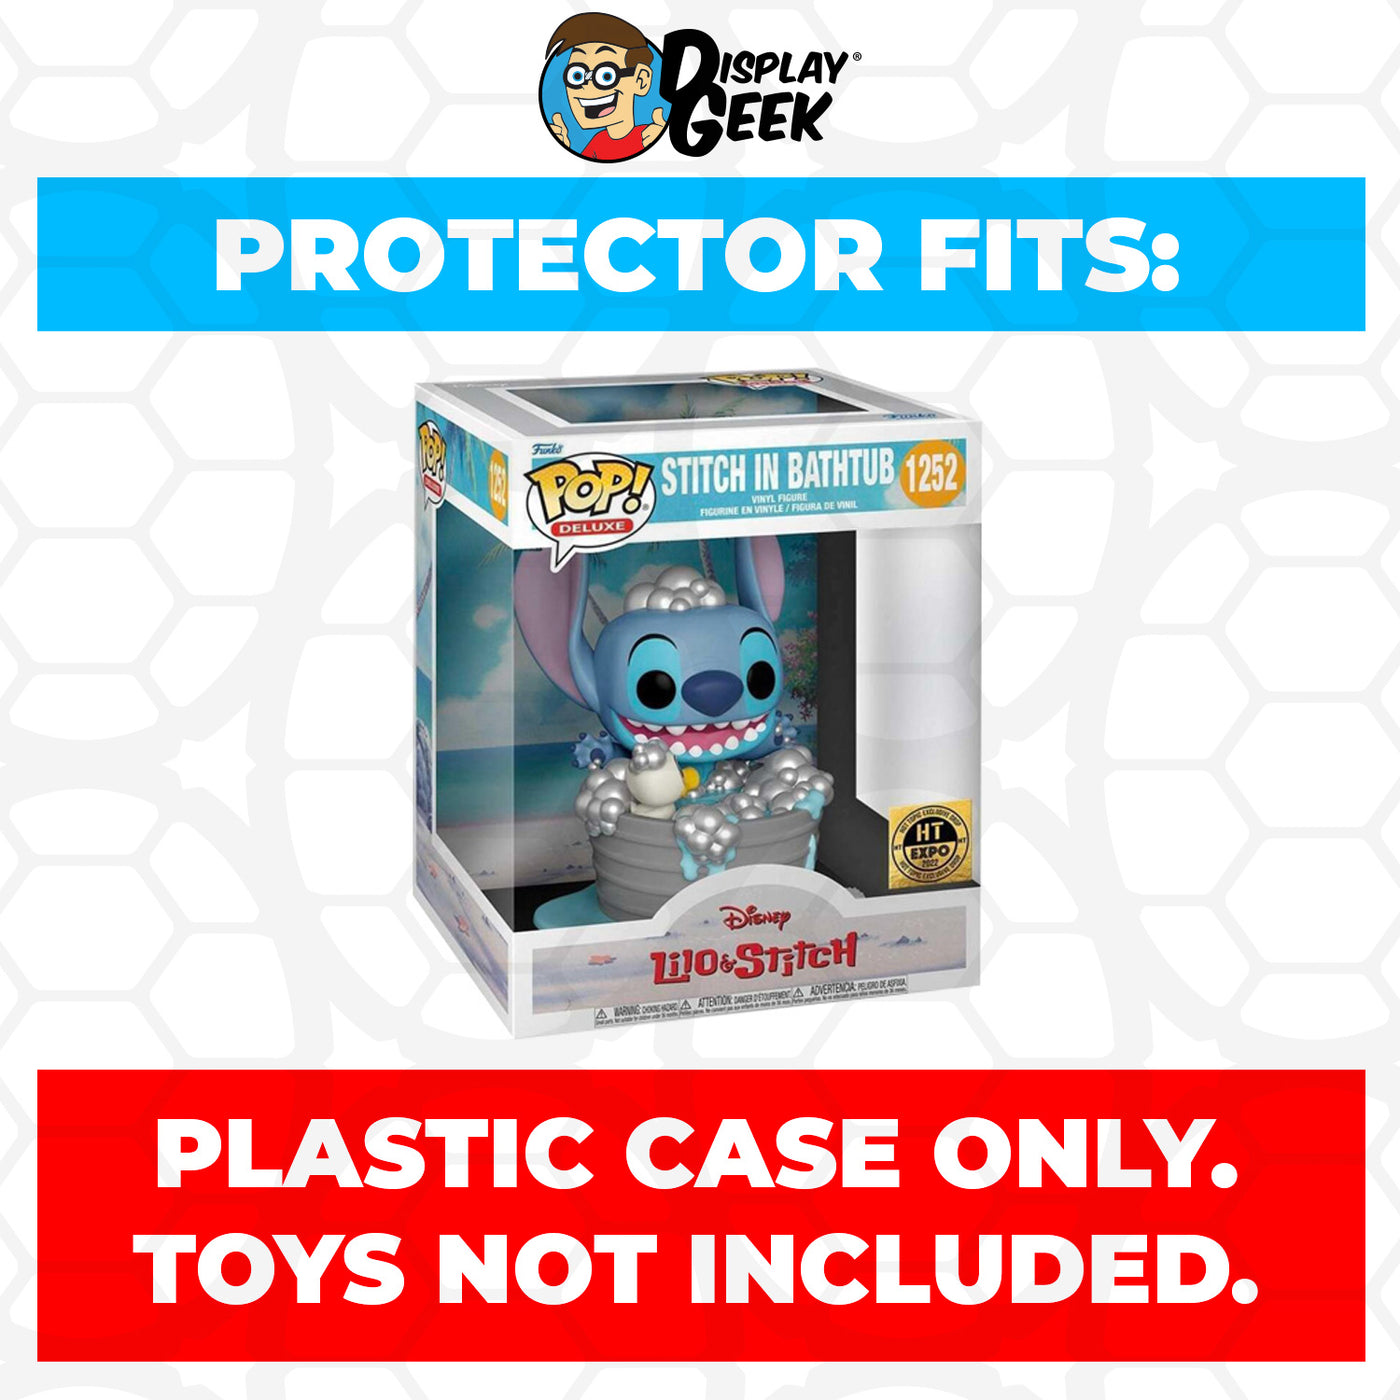 Pop Protector for Stitch in Bathtub HT Expo #1252 Funko Pop Deluxe on The Protector Guide App by Display Geek